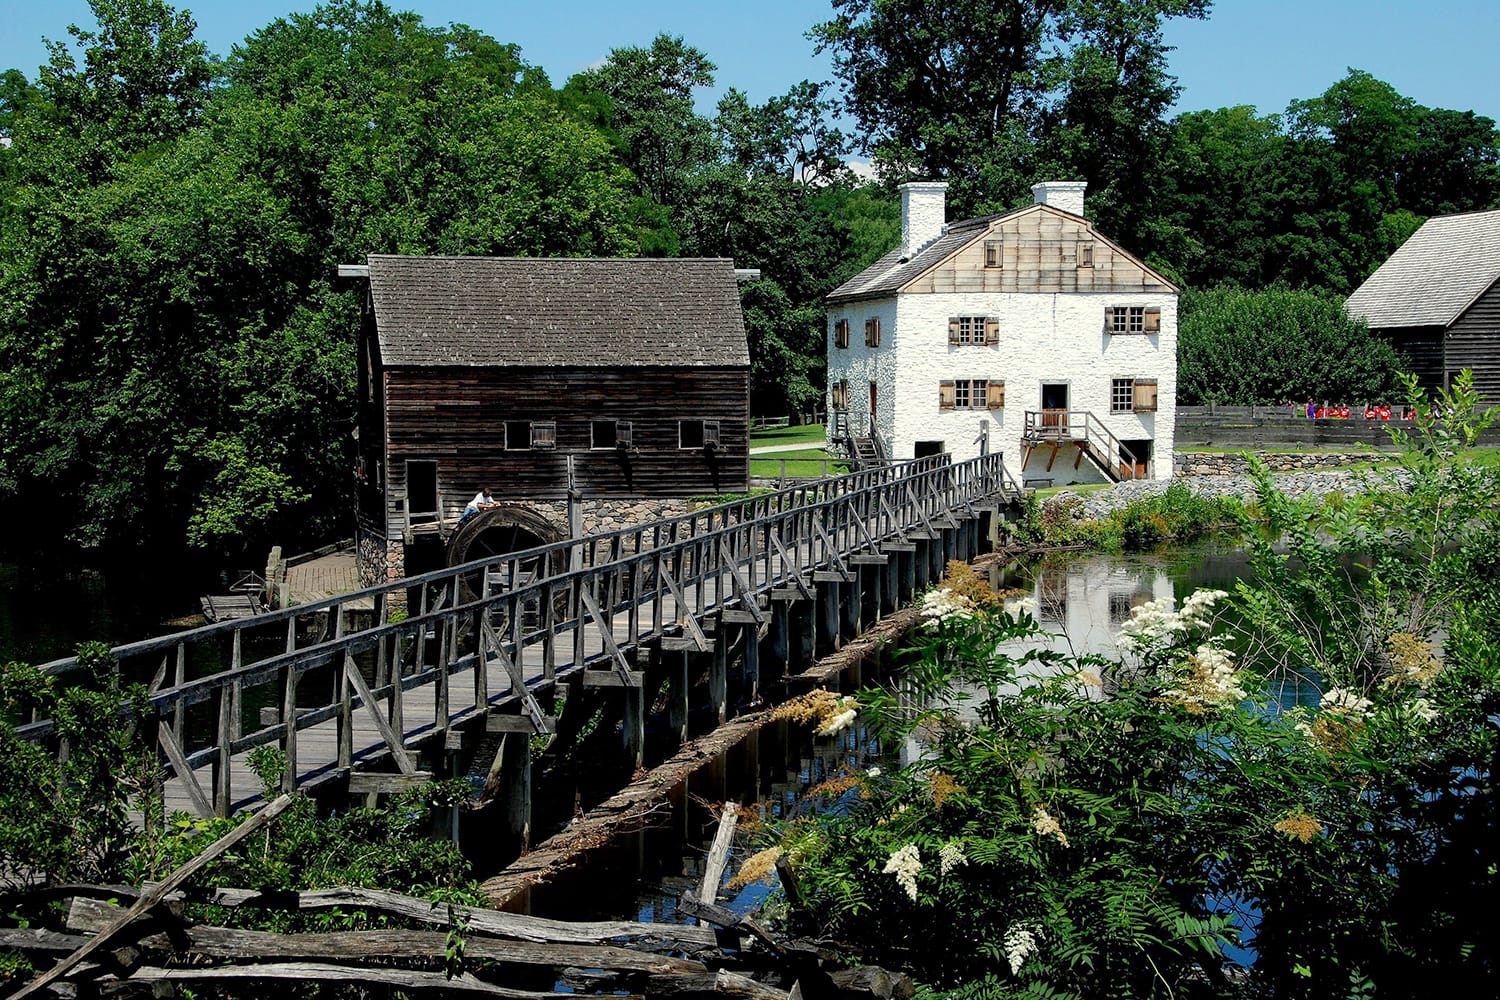 Mill Pond Bridge, wooden grist mill, and c. 1750 Philipse family manor house at Philipsburg Manor in Sleepy Hollow, New York, USA